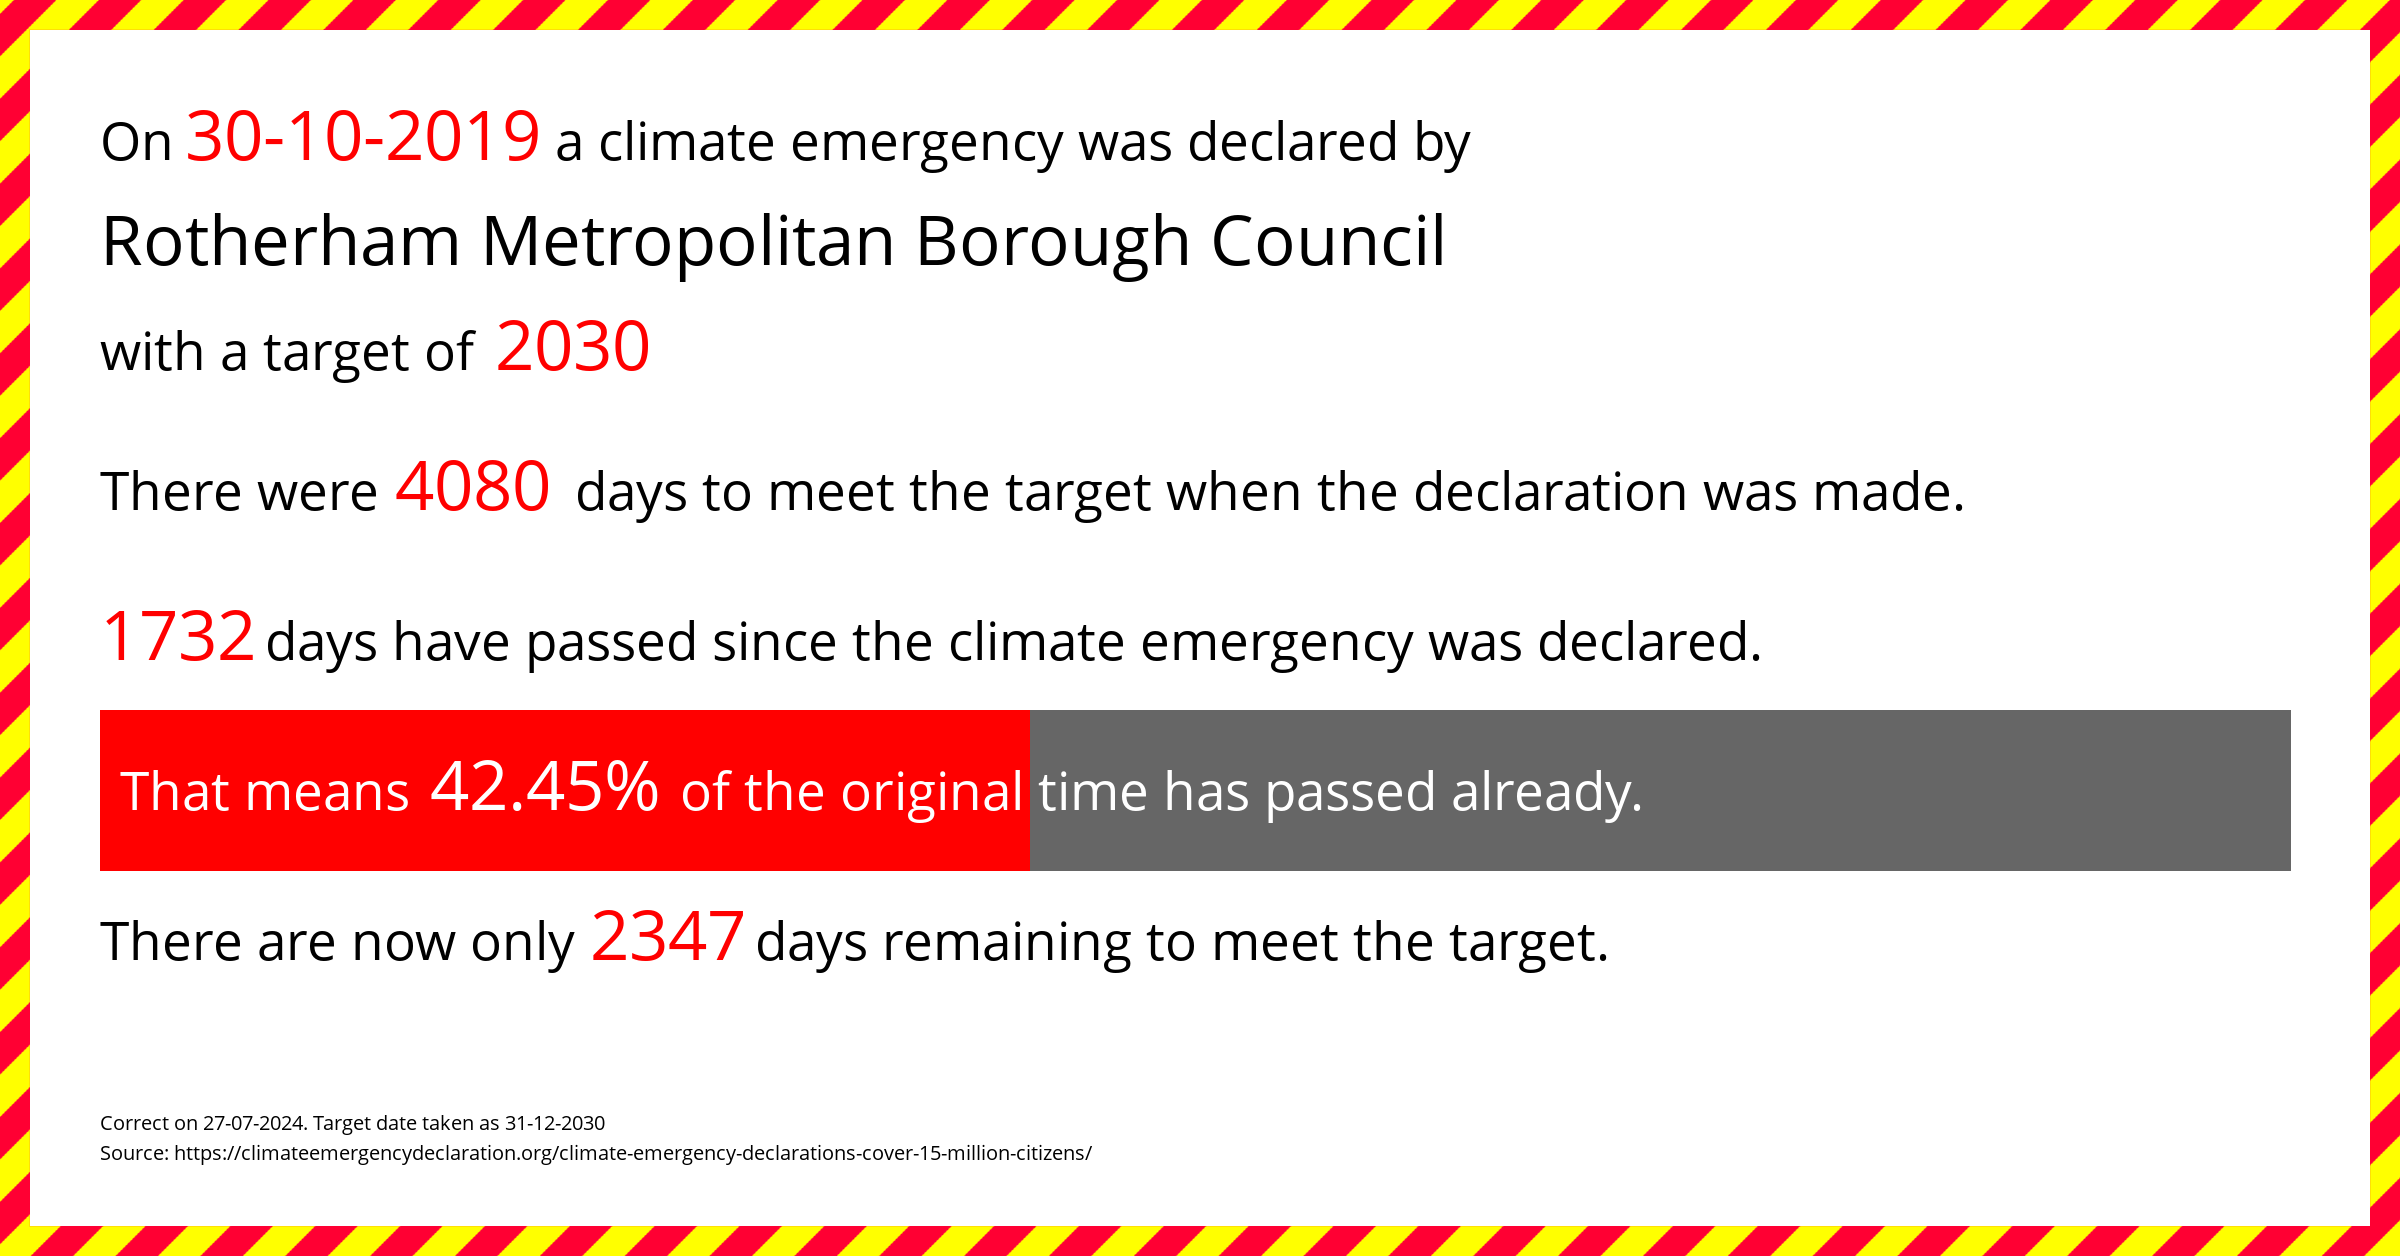 Rotherham Metropolitan Borough Council  declared a Climate emergency on Wednesday 30th October 2019, with a target of 2030.